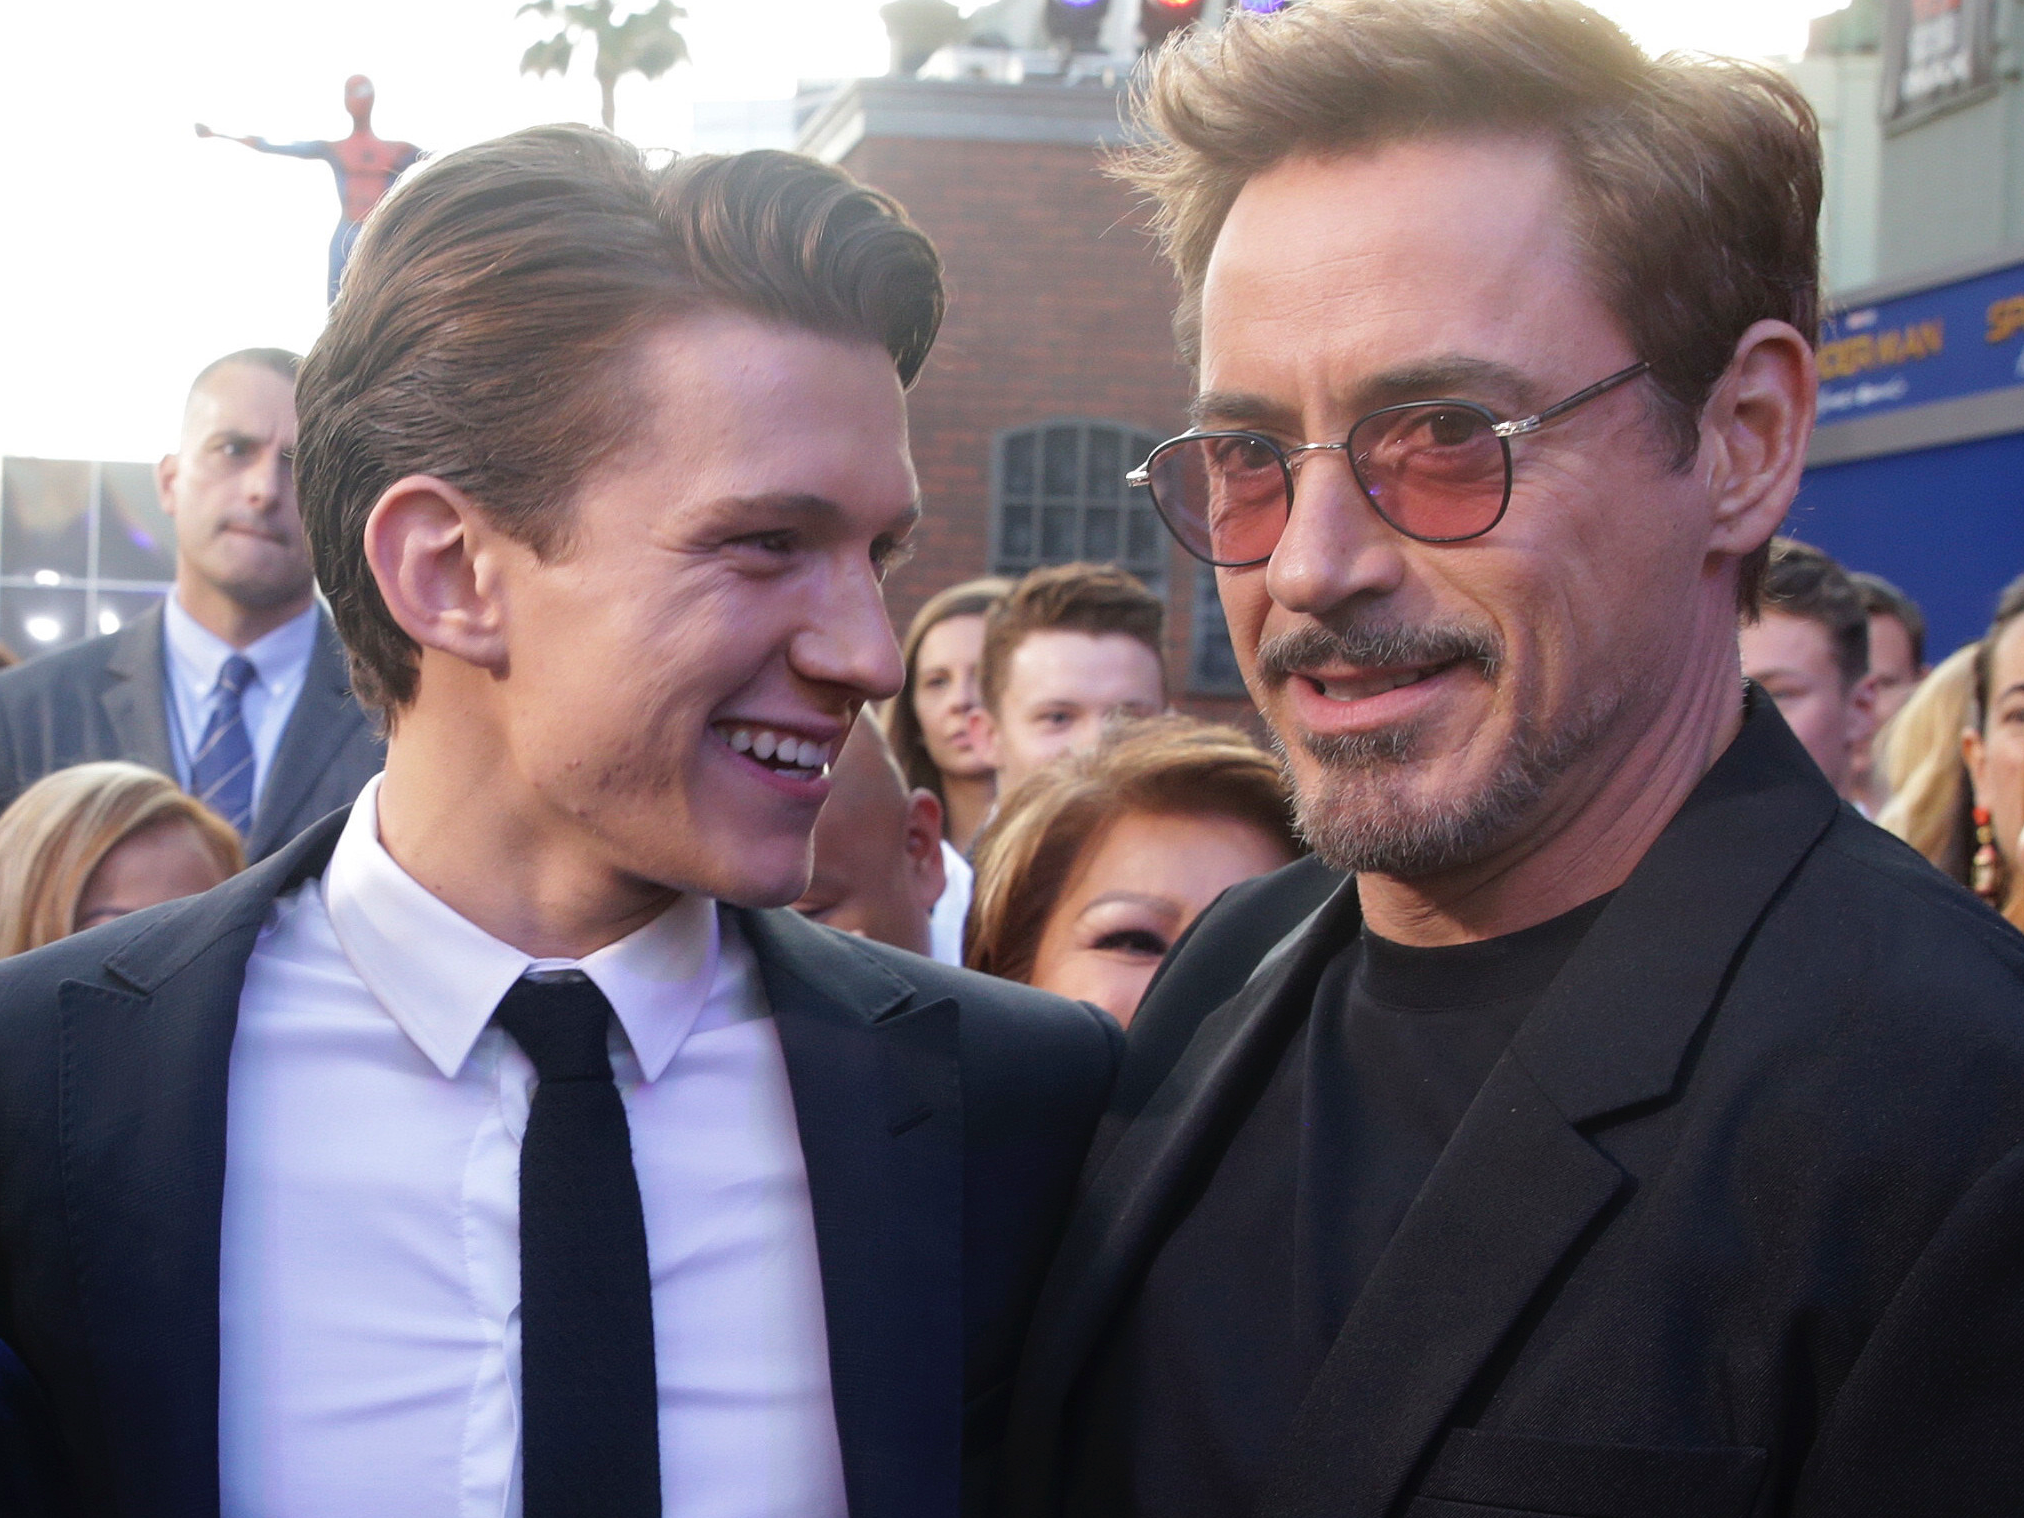 A complete timeline of Marvel costars Robert Downey Jr. and Tom Holland's  friendship